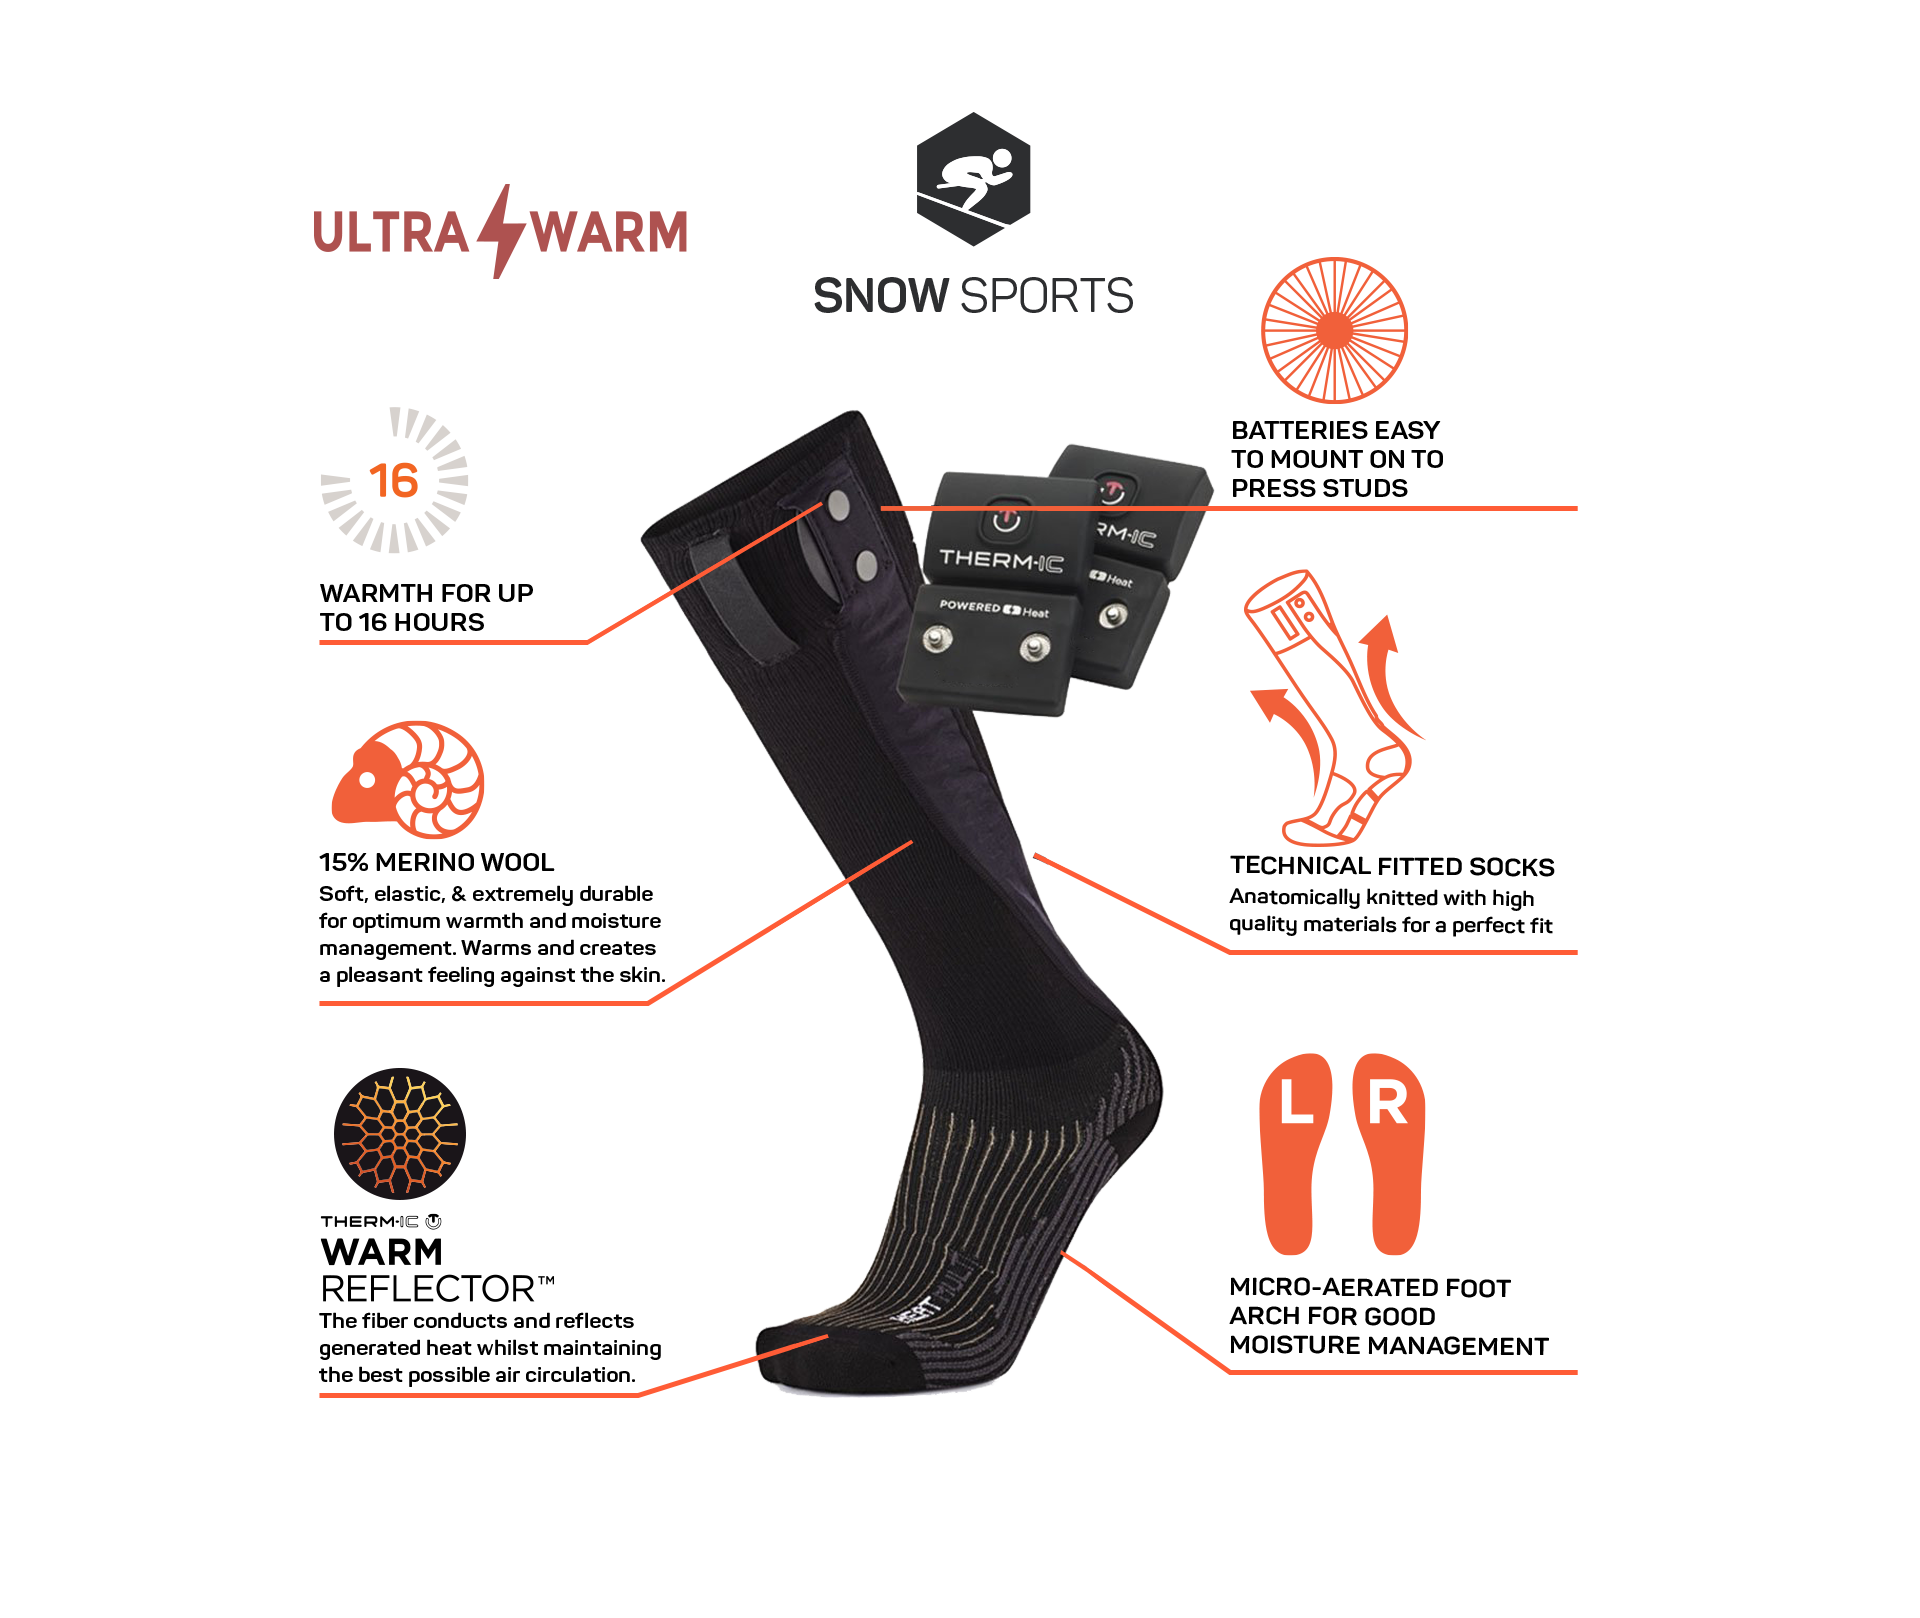 Chaussettes de ski chauffantes HEATED SOCKS + BATTERIES S-PACK 1200 THERM-IC